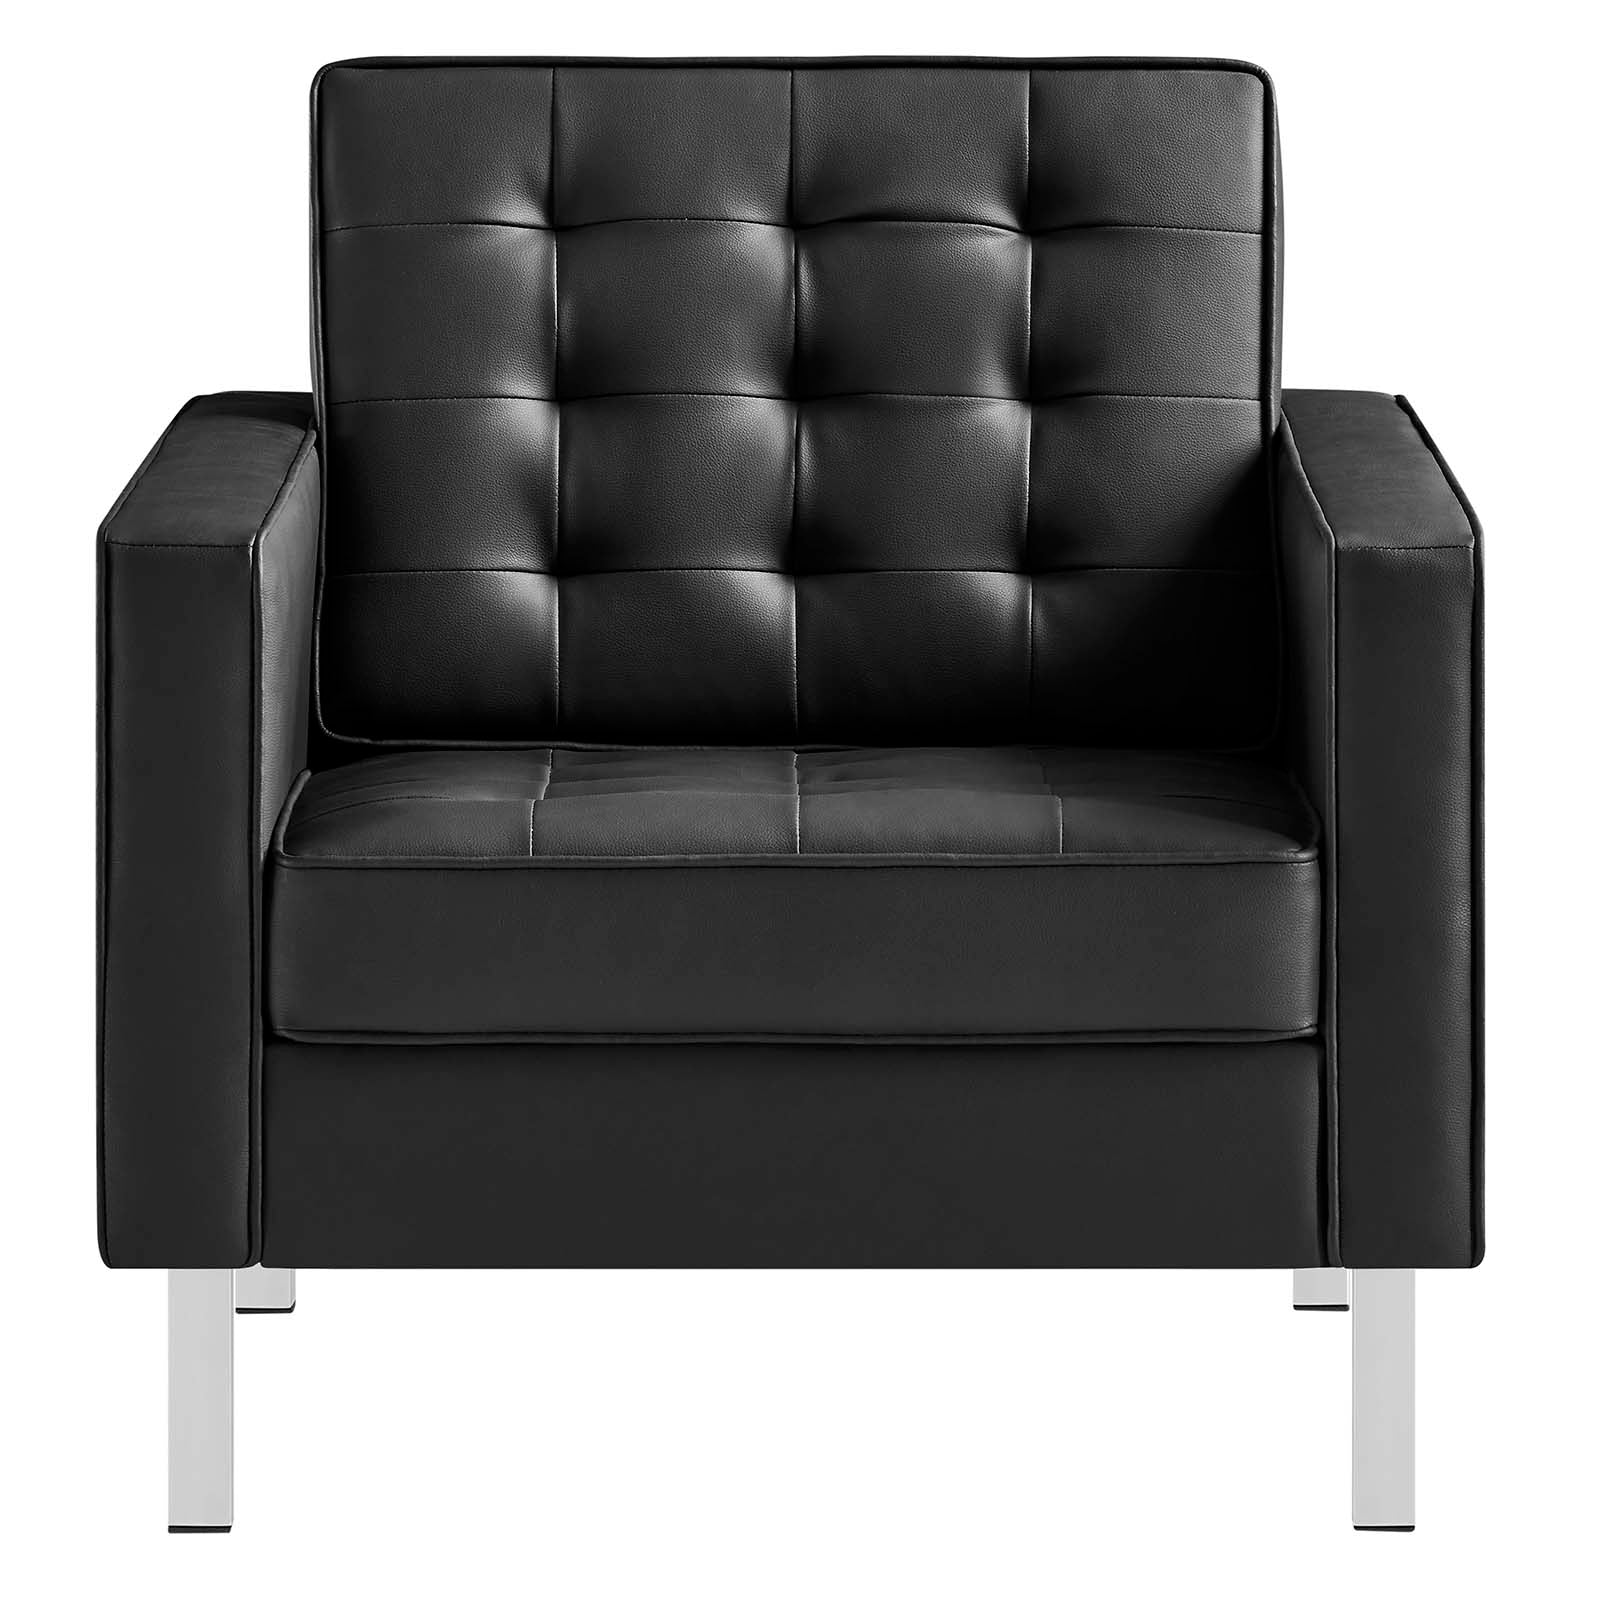 Modway Living Room Sets - Loft Tufted Upholstered Faux Leather Armchair Set of 2 Silver Black